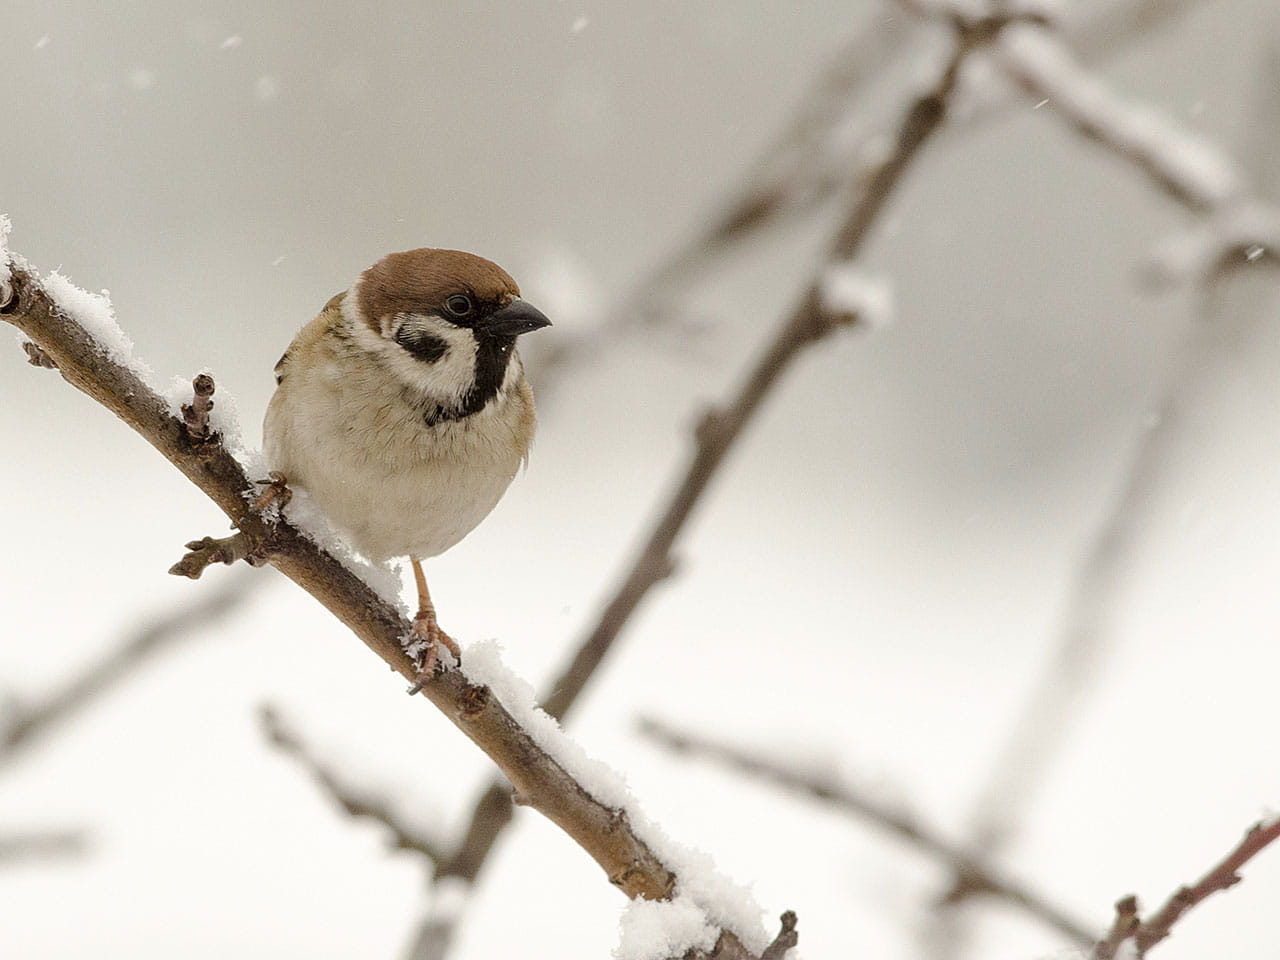 Sparrow sitting on a branc in winter snow